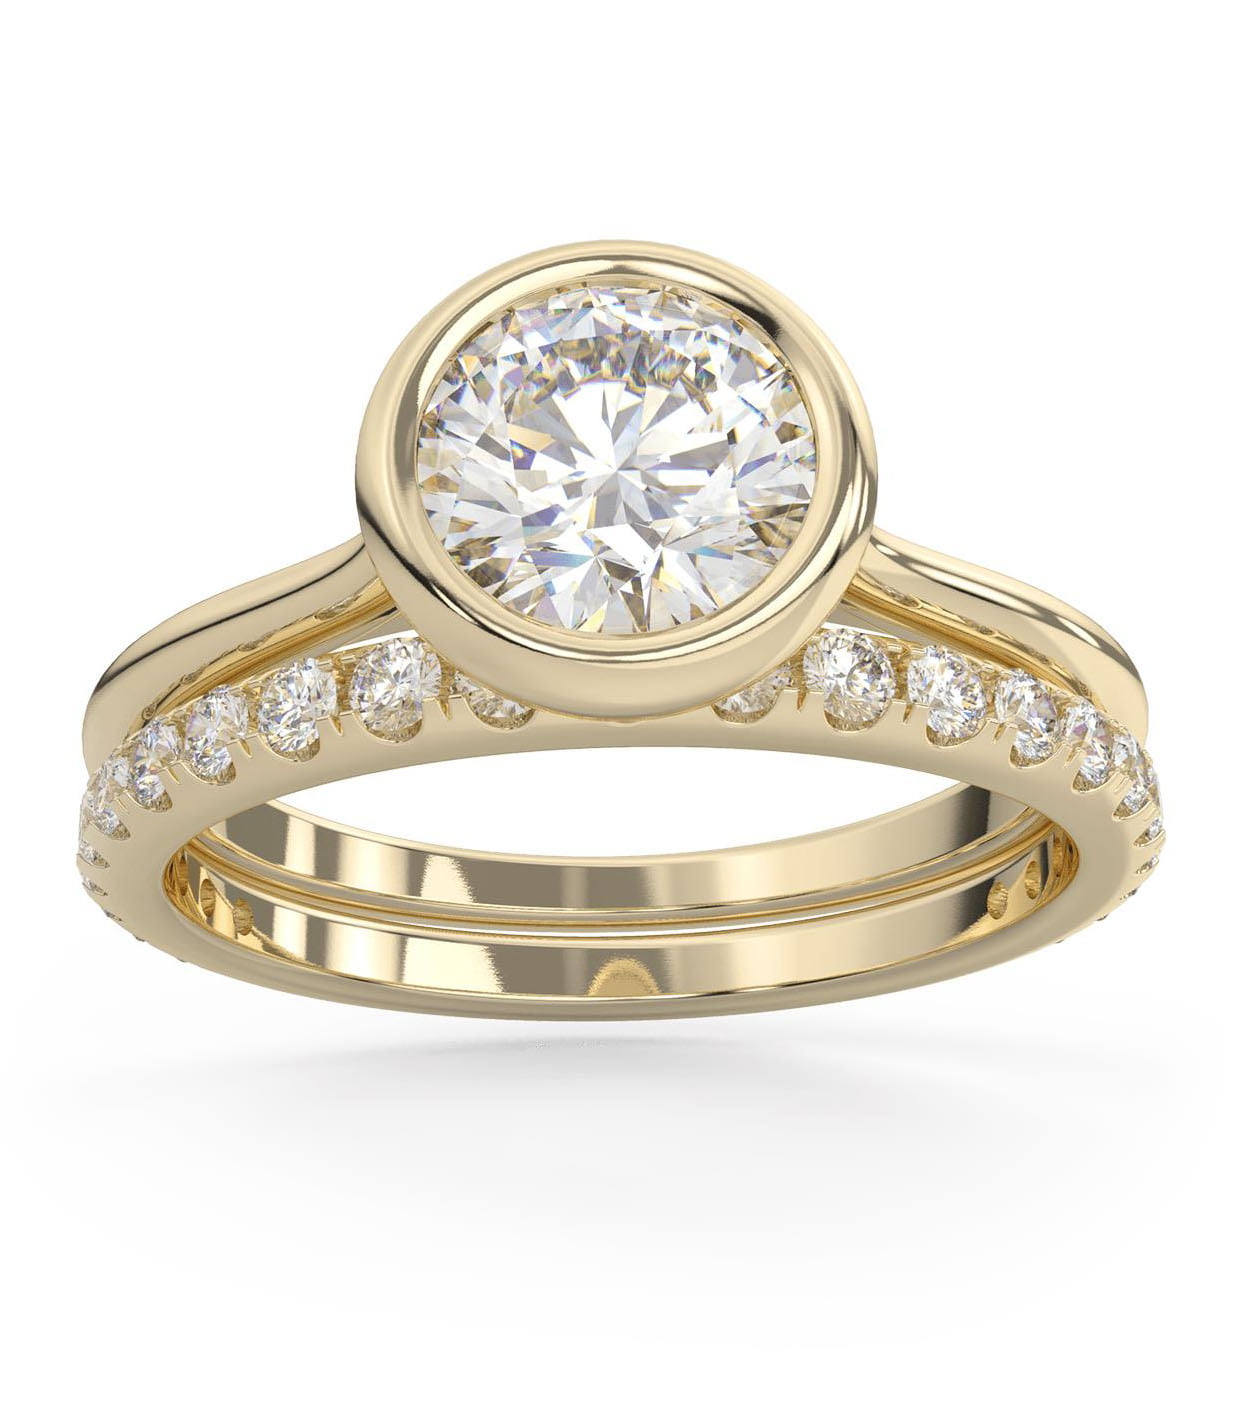 Details about   2.35 Heart Cut Anniversary Engagement Bridal Solitaire Halo Ring 14k Yellow Gold 